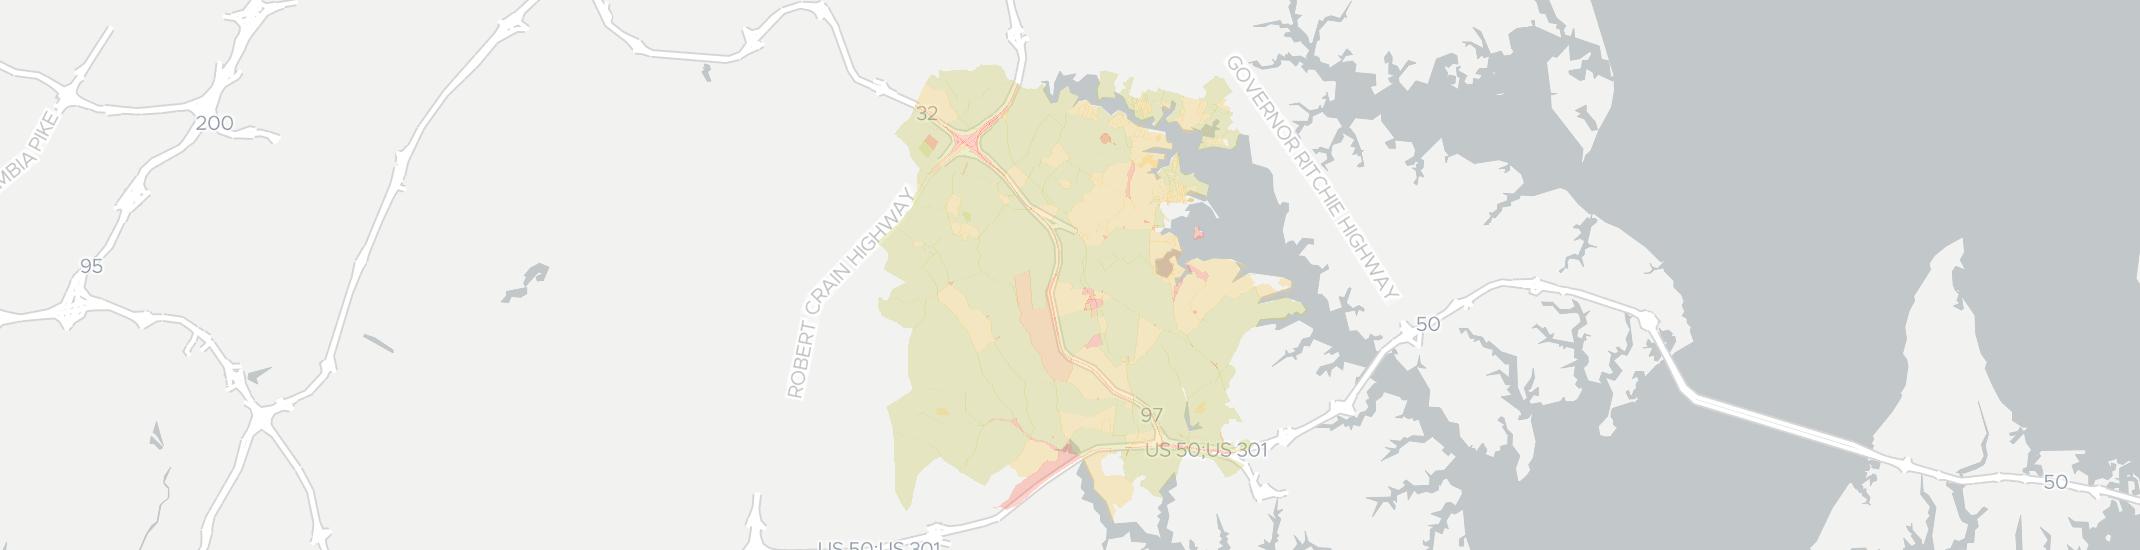 Crownsville Internet Competition Map. Click for interactive map